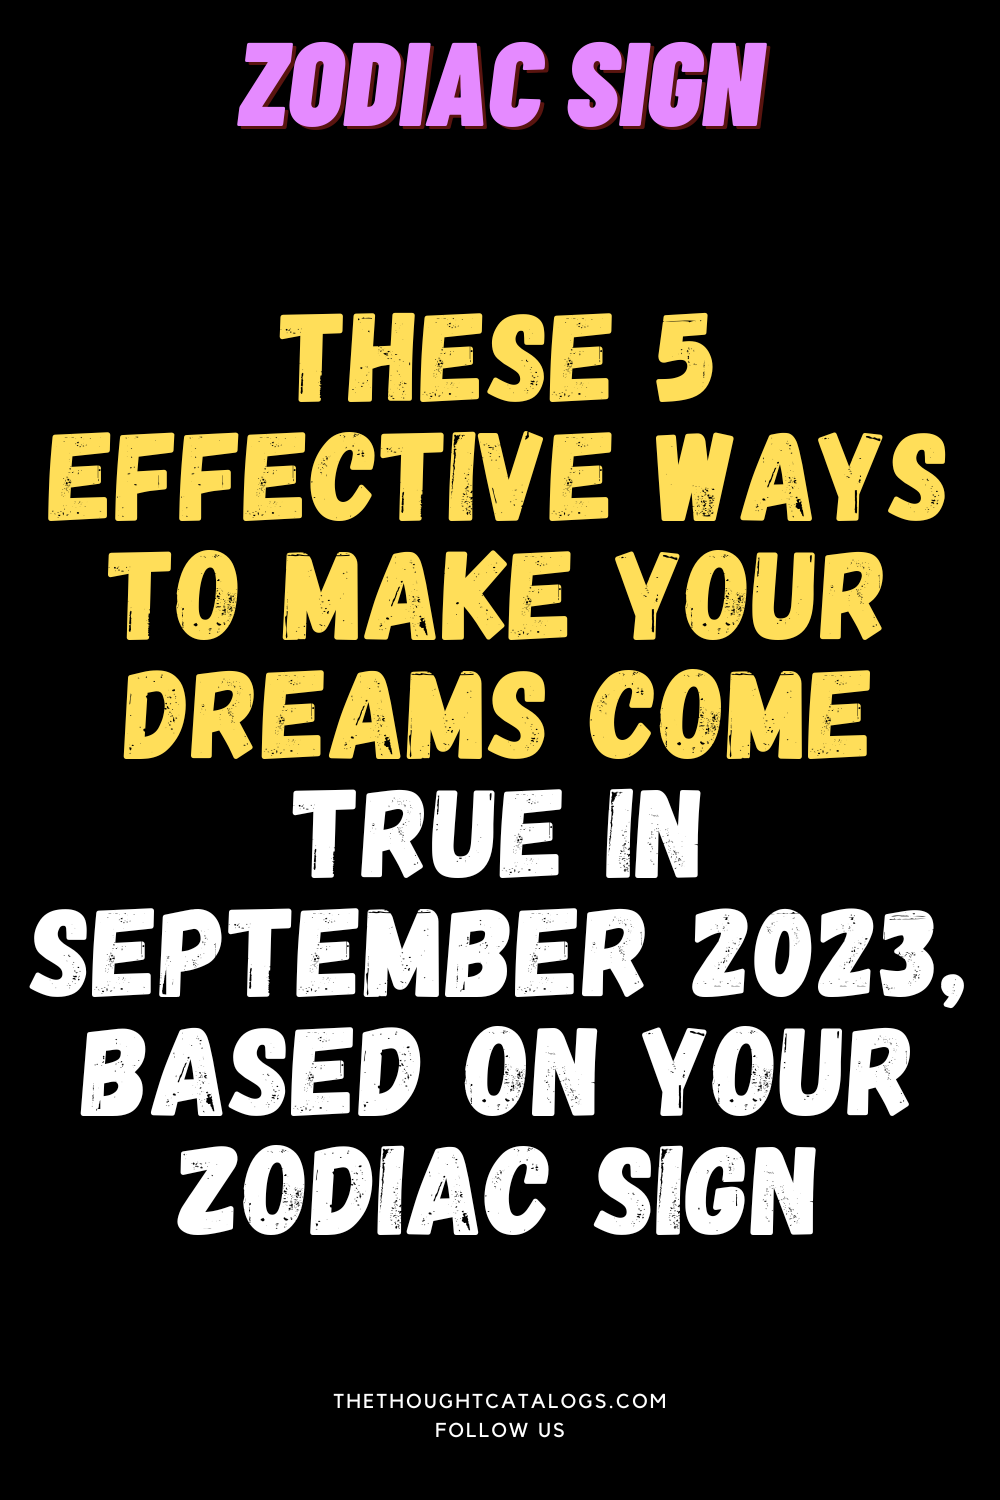 Dreams Come True In September 2023, Based On Your Zodiac